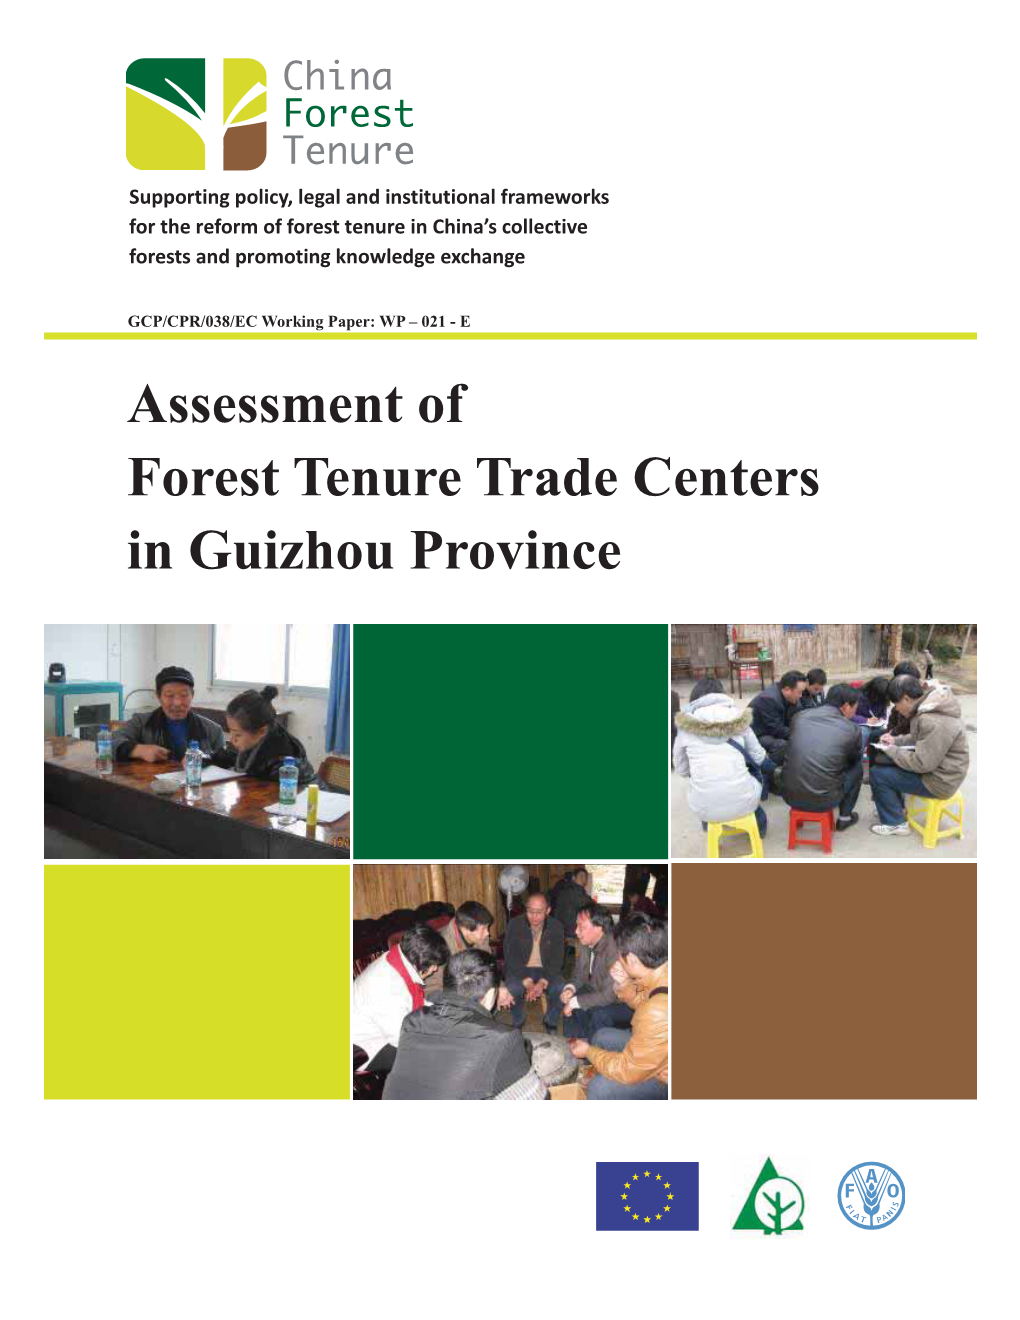 Assessment of Forest Tenure Trade Centers in Guizhou Province